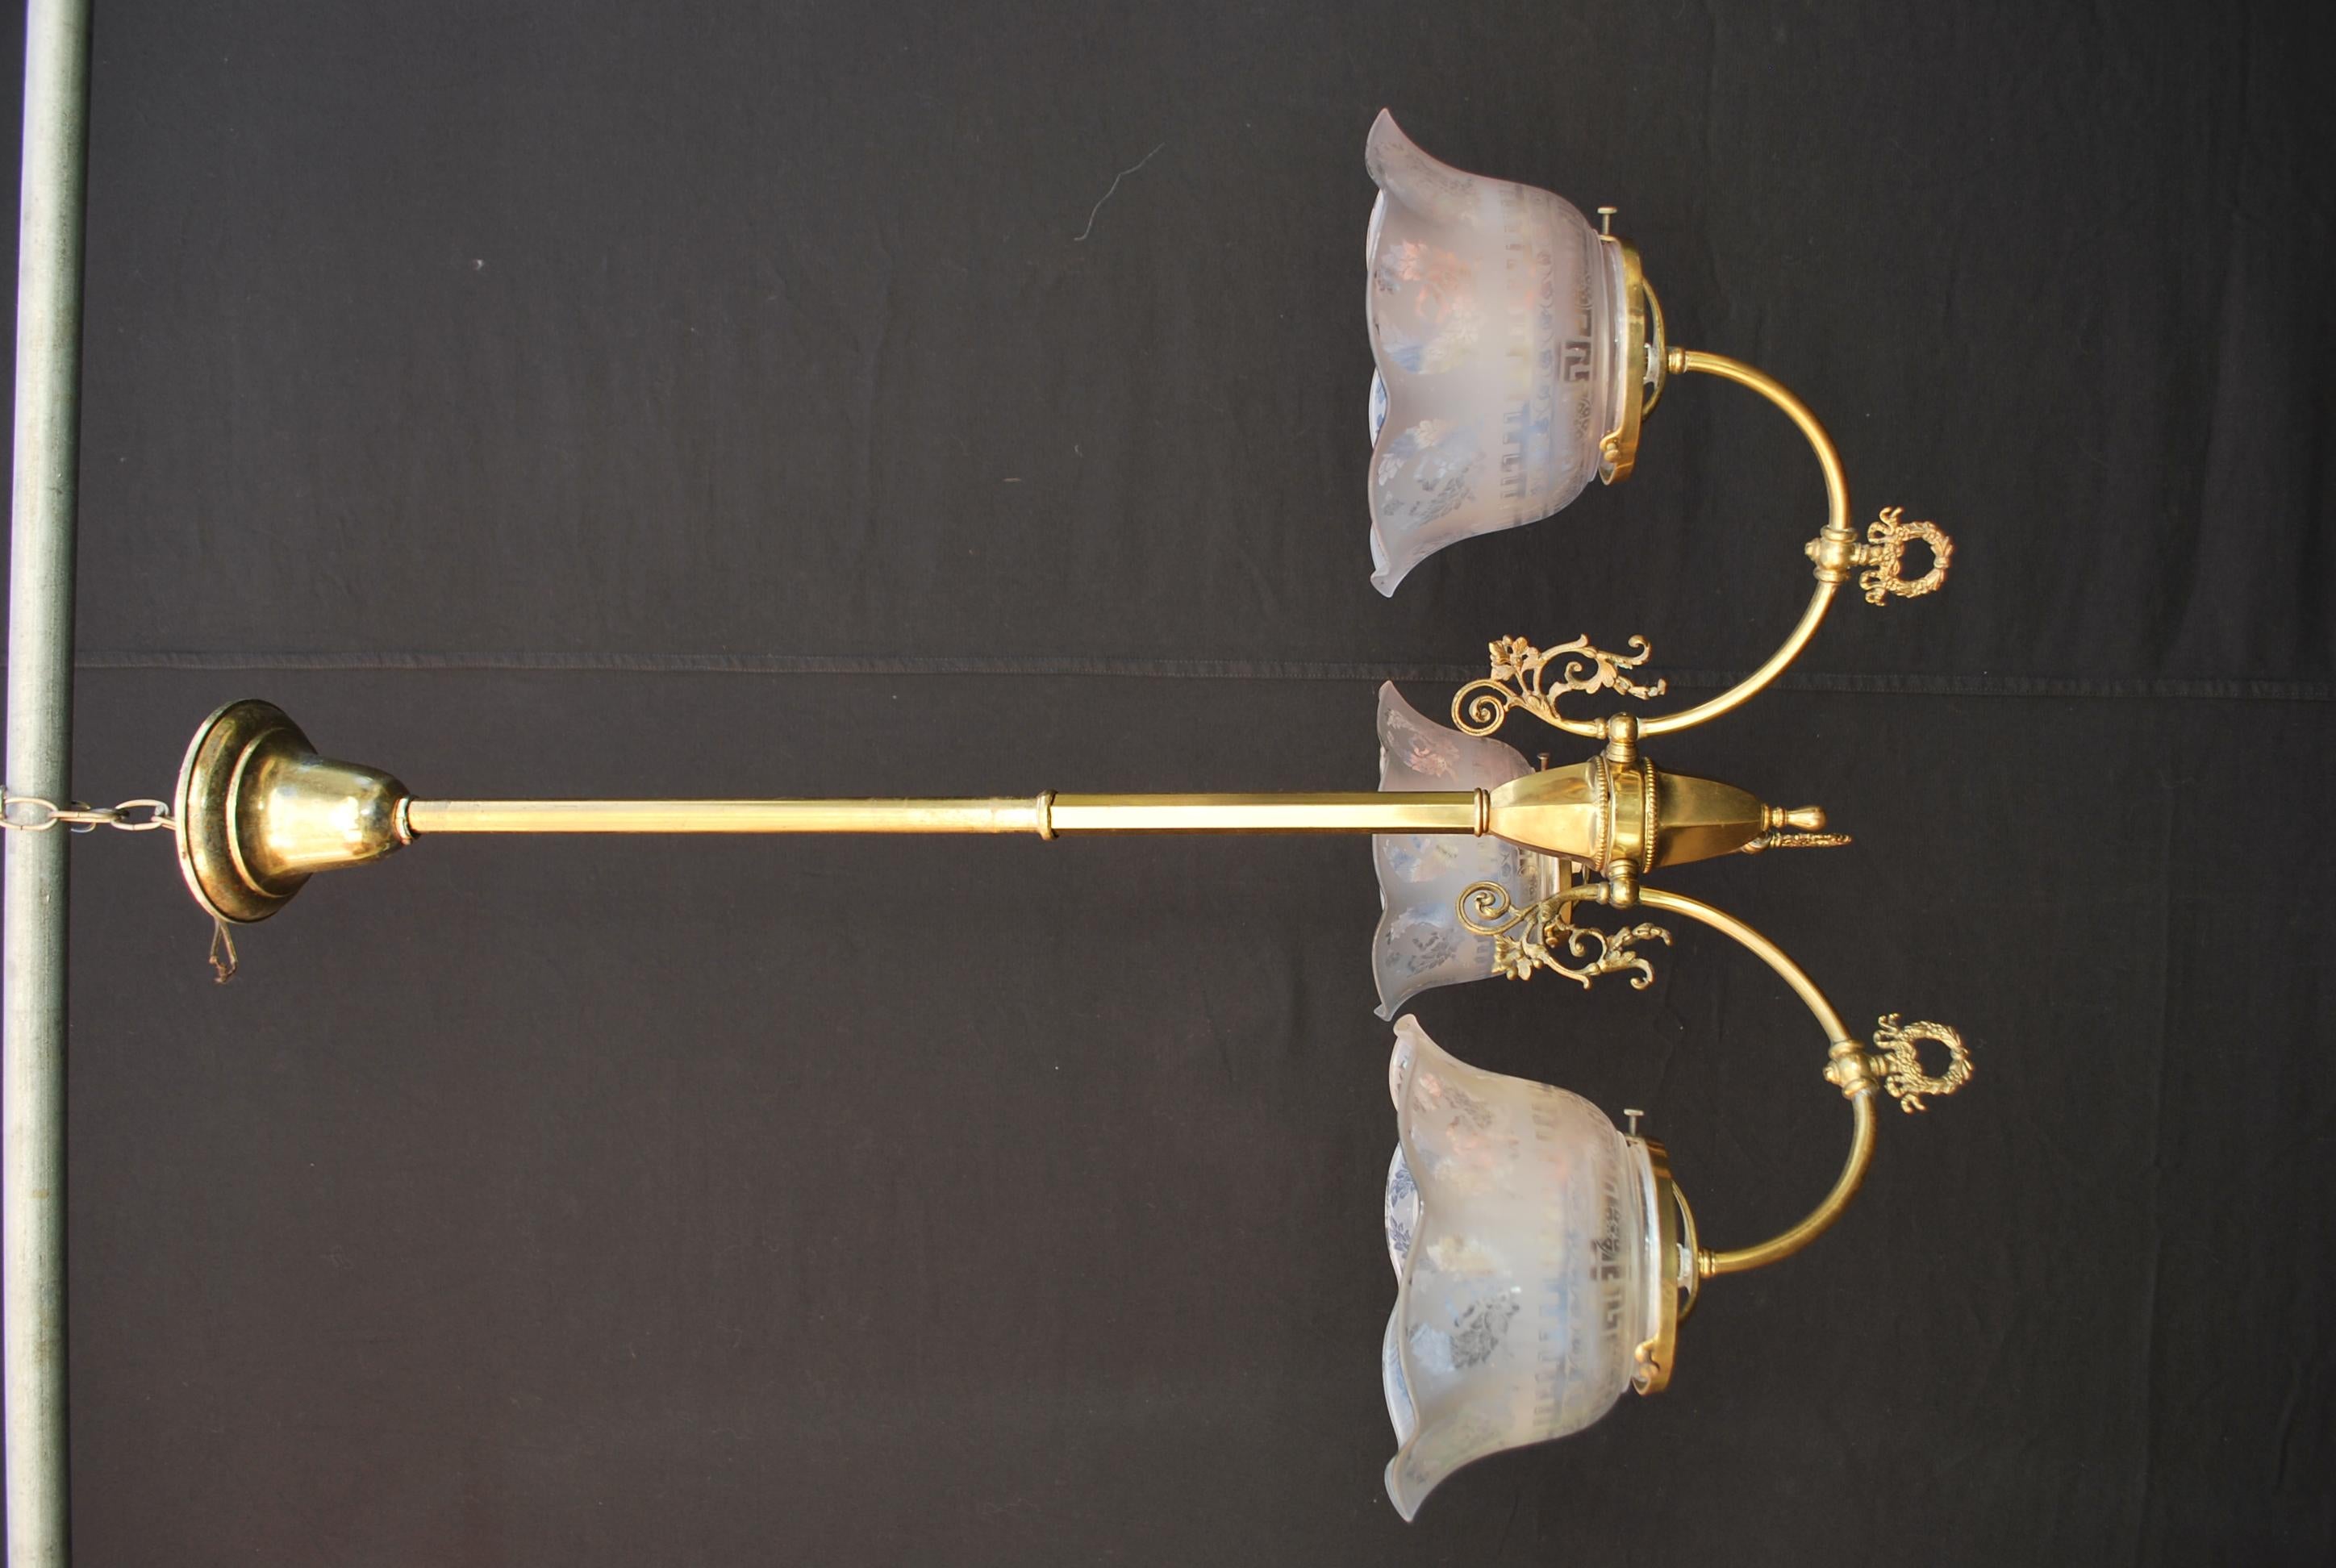 A beautiful and elegant late 19th century chandelier , originally it was a gas fixture that was converted into electricity, the height can be allot shorter, we could cut the central rod, to almost a flush light